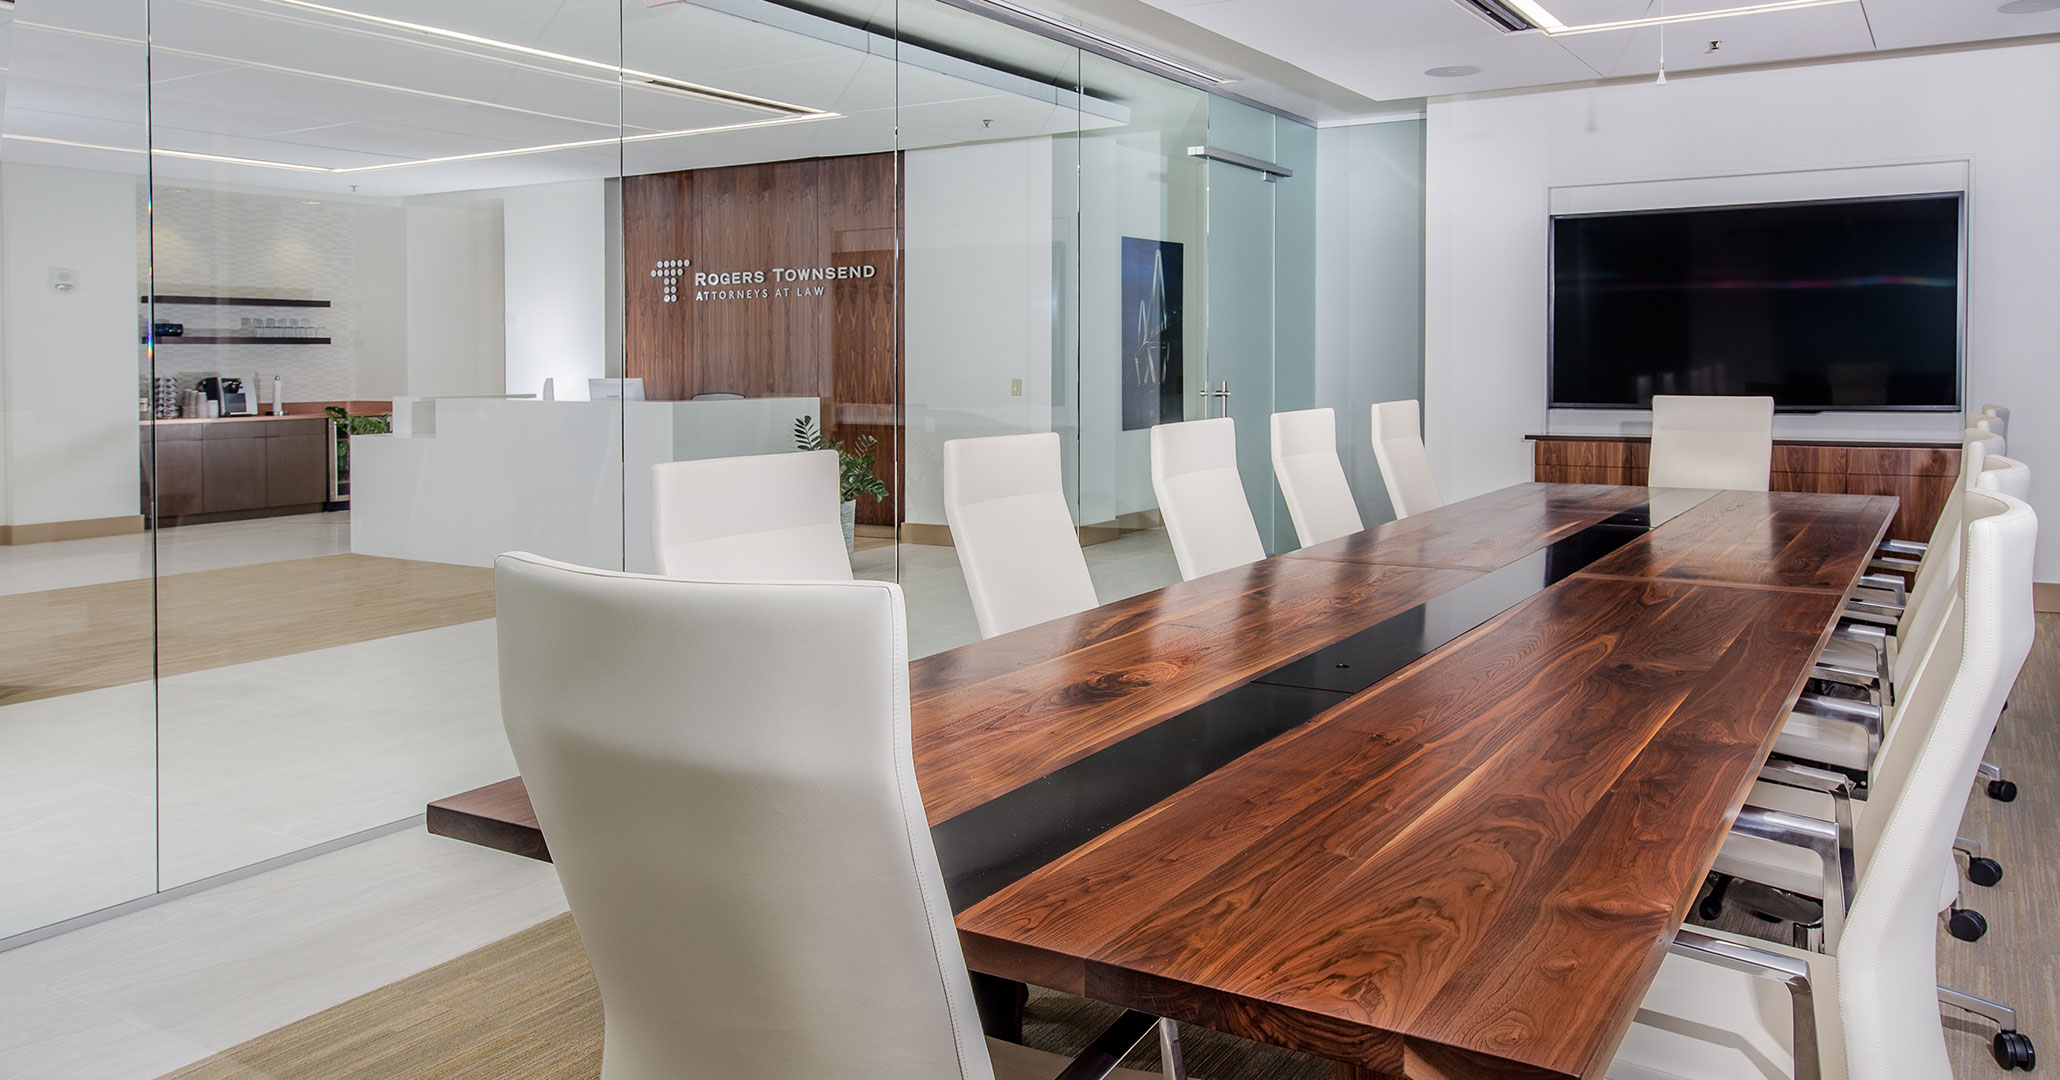 Boudreaux architects provided interior design services for Rogers Townsend Thomas Attorneys at Law for their modern office spaces.